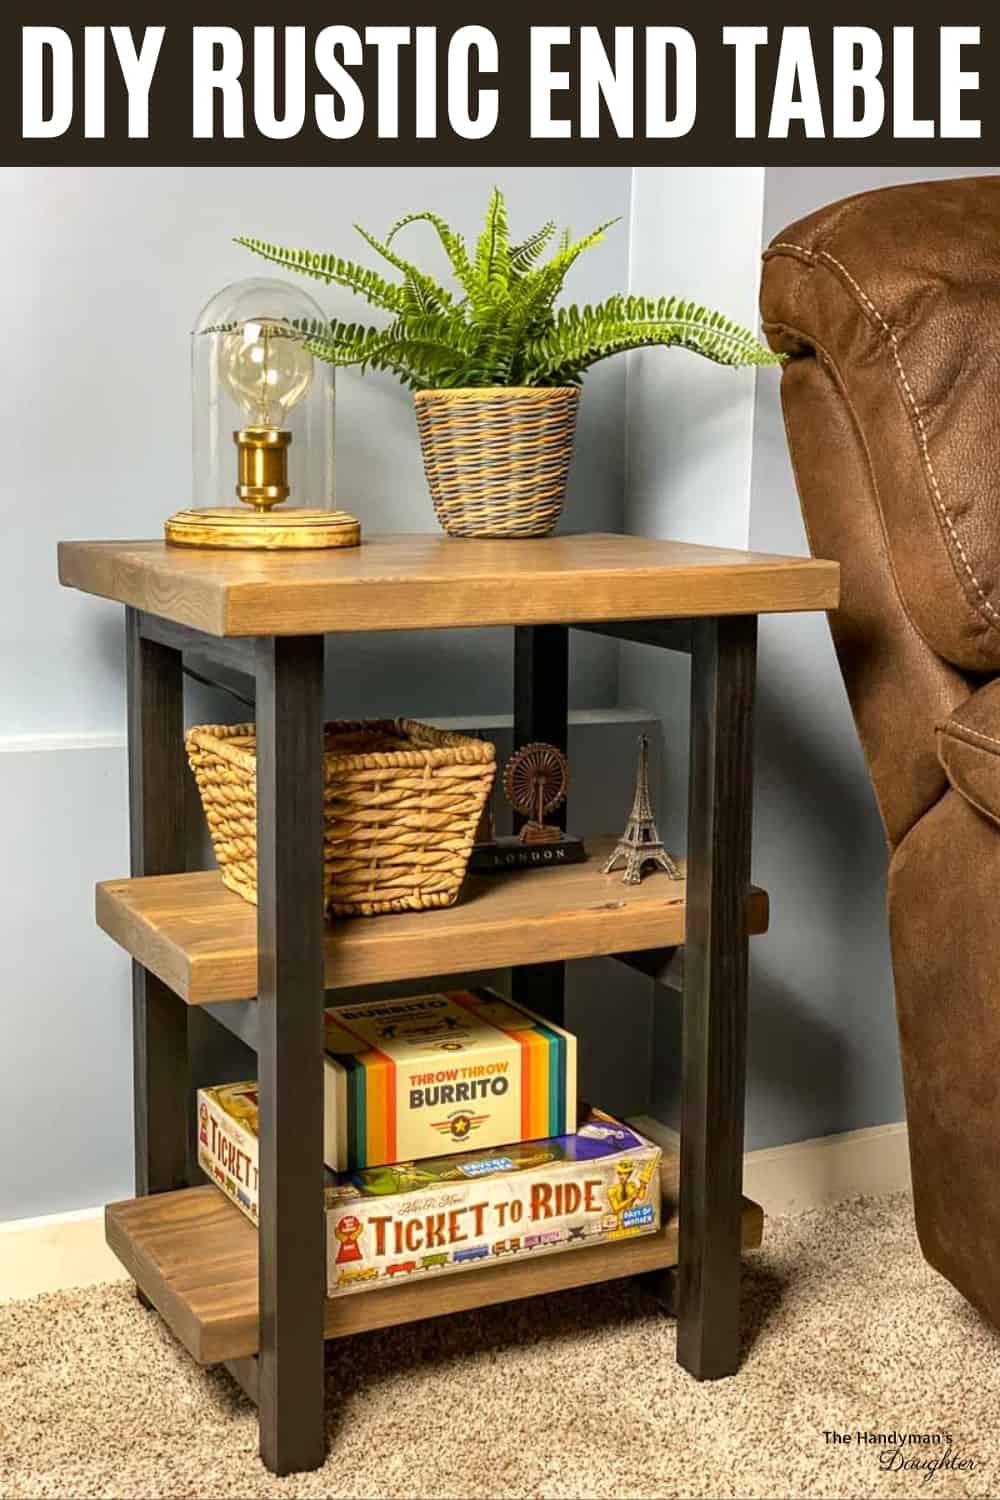 https://www.thehandymansdaughter.com/wp-content/uploads/2020/11/DIY-Rustic-End-Table-Pin-1.jpg